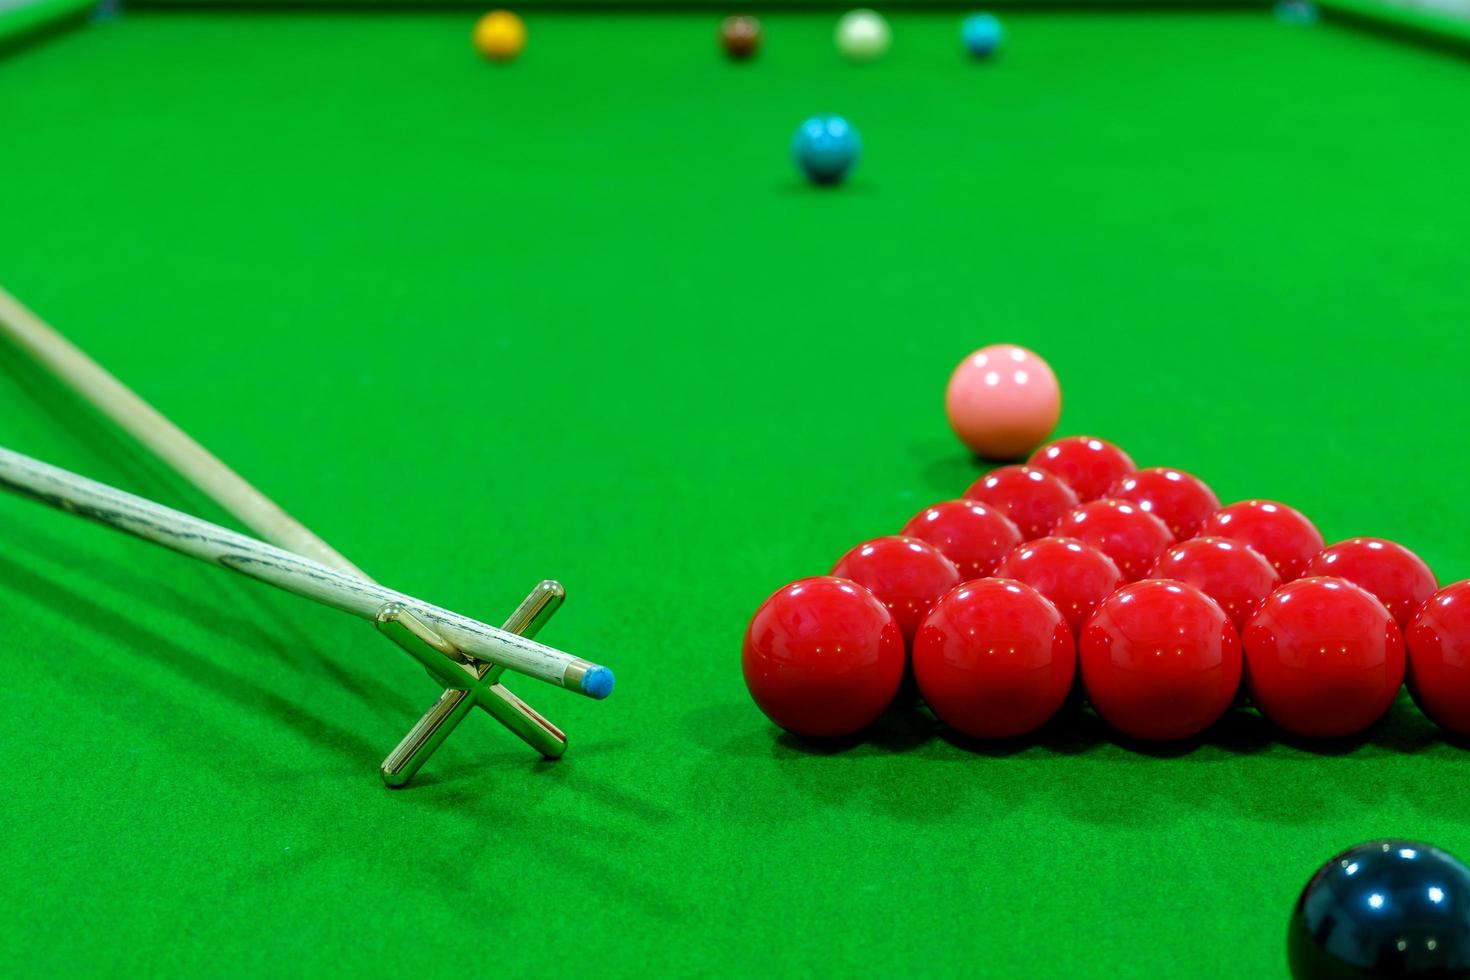 The snooker balls on the table consisted of red, black, pink, blue, green, white, brown, and yellow, with a cue placed on wood on the side. photo